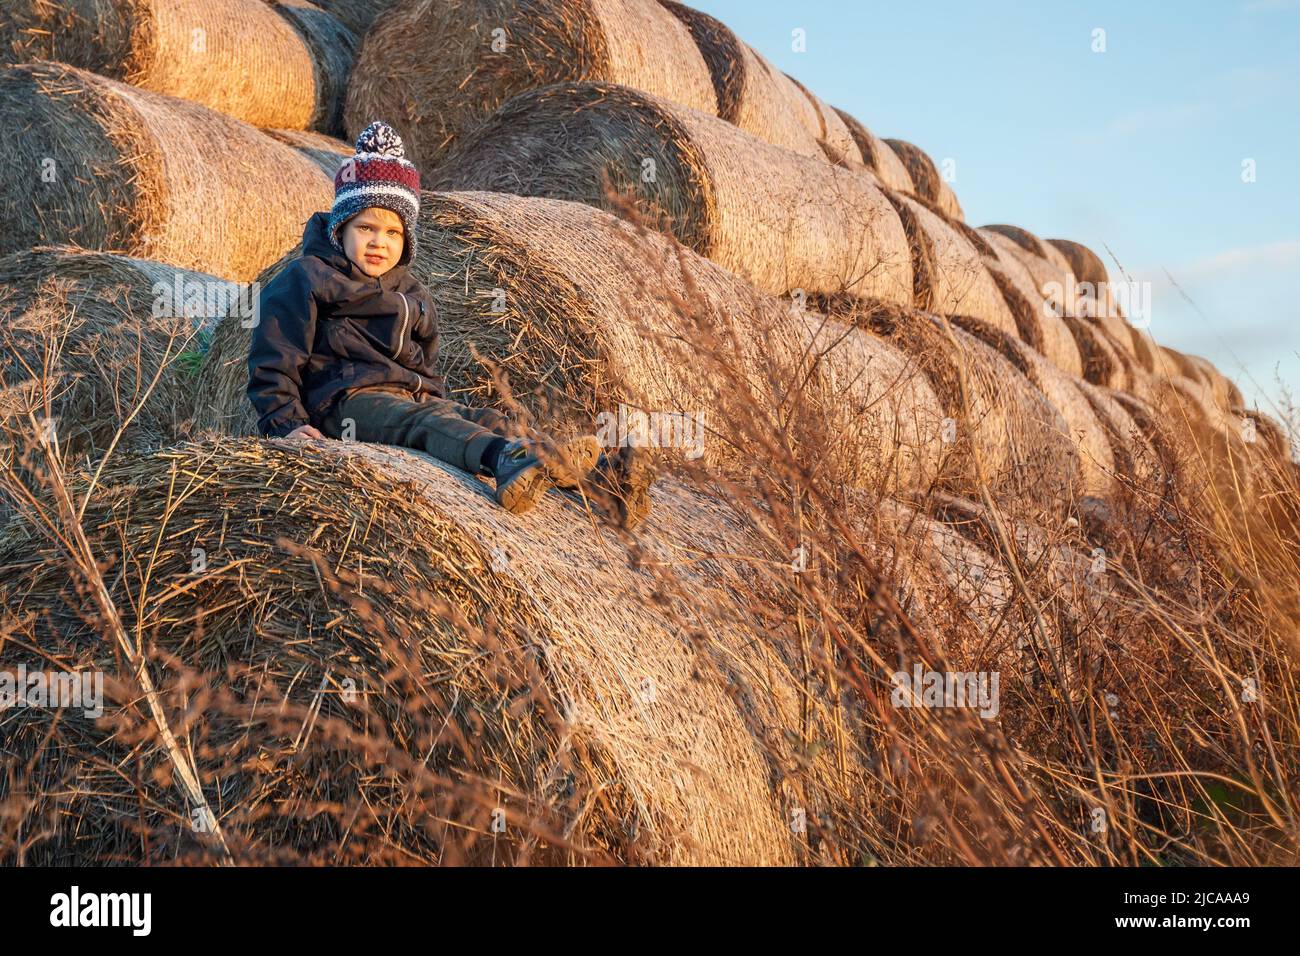 A cute little boy in autumn clothes and a knitted hat poses against a background of golden hay bales. Horizontal photo. Stock Photo